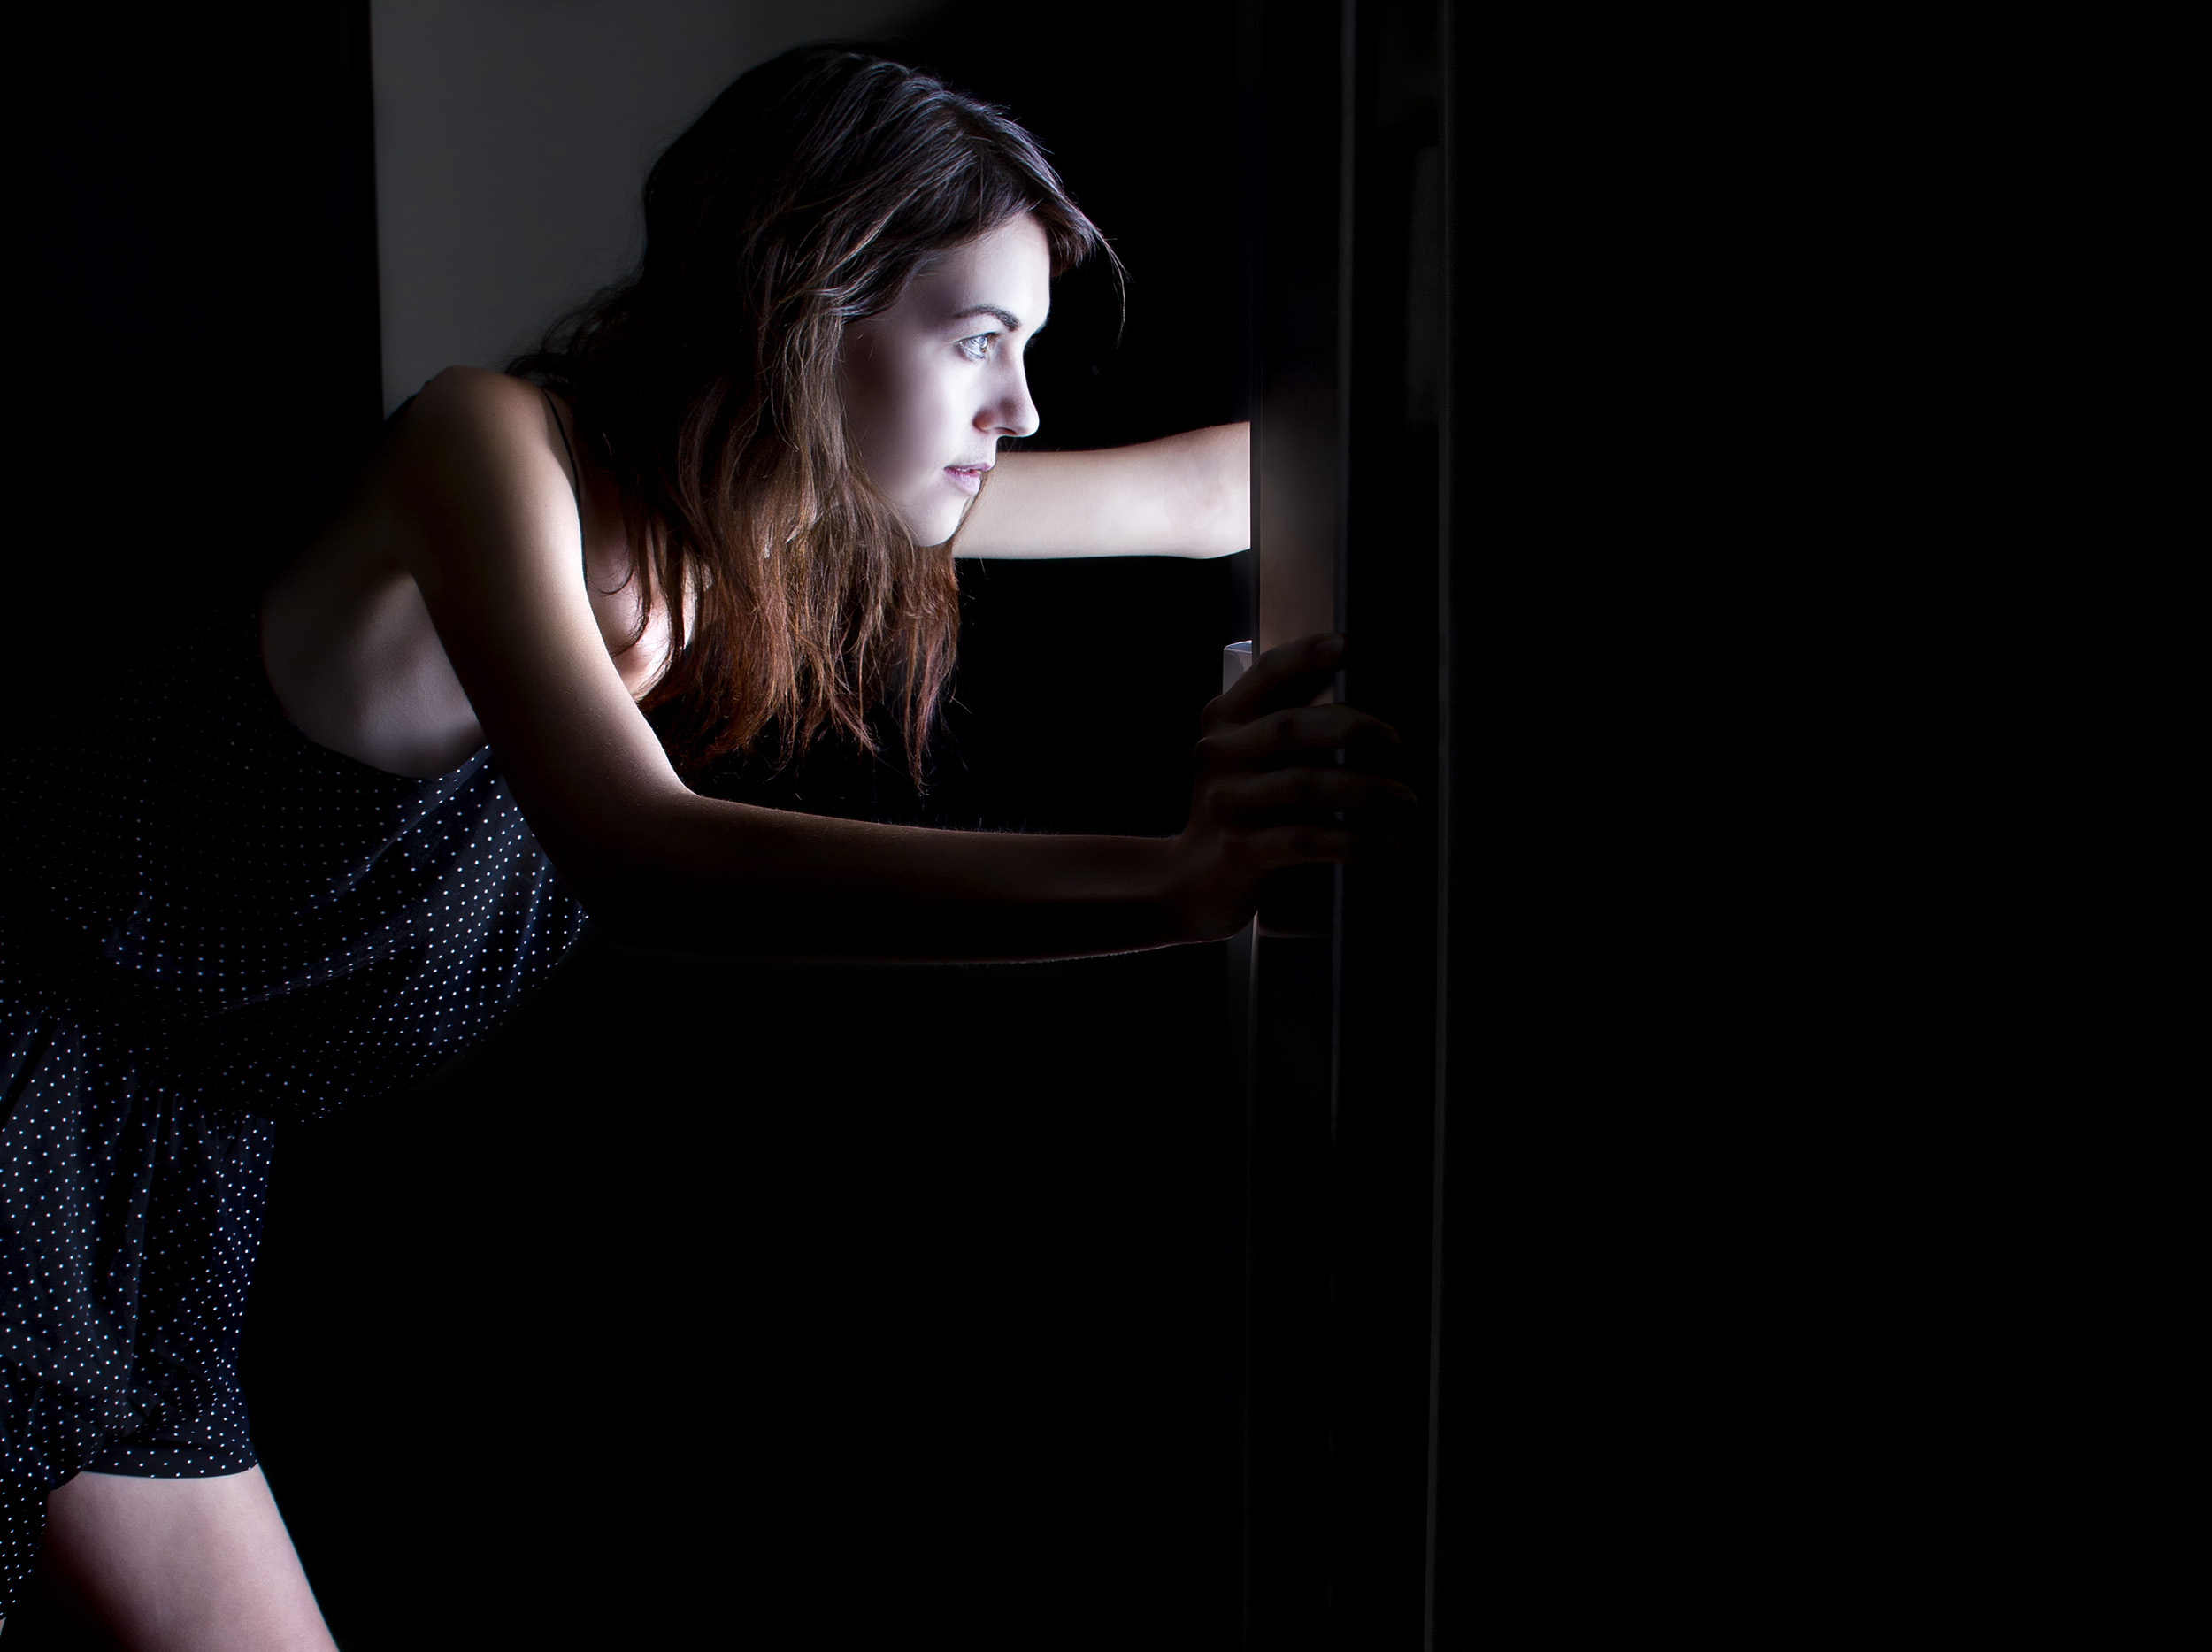 Woman craving and looking for food in an empty fridge late at night. The image is shot low key to depict night time.